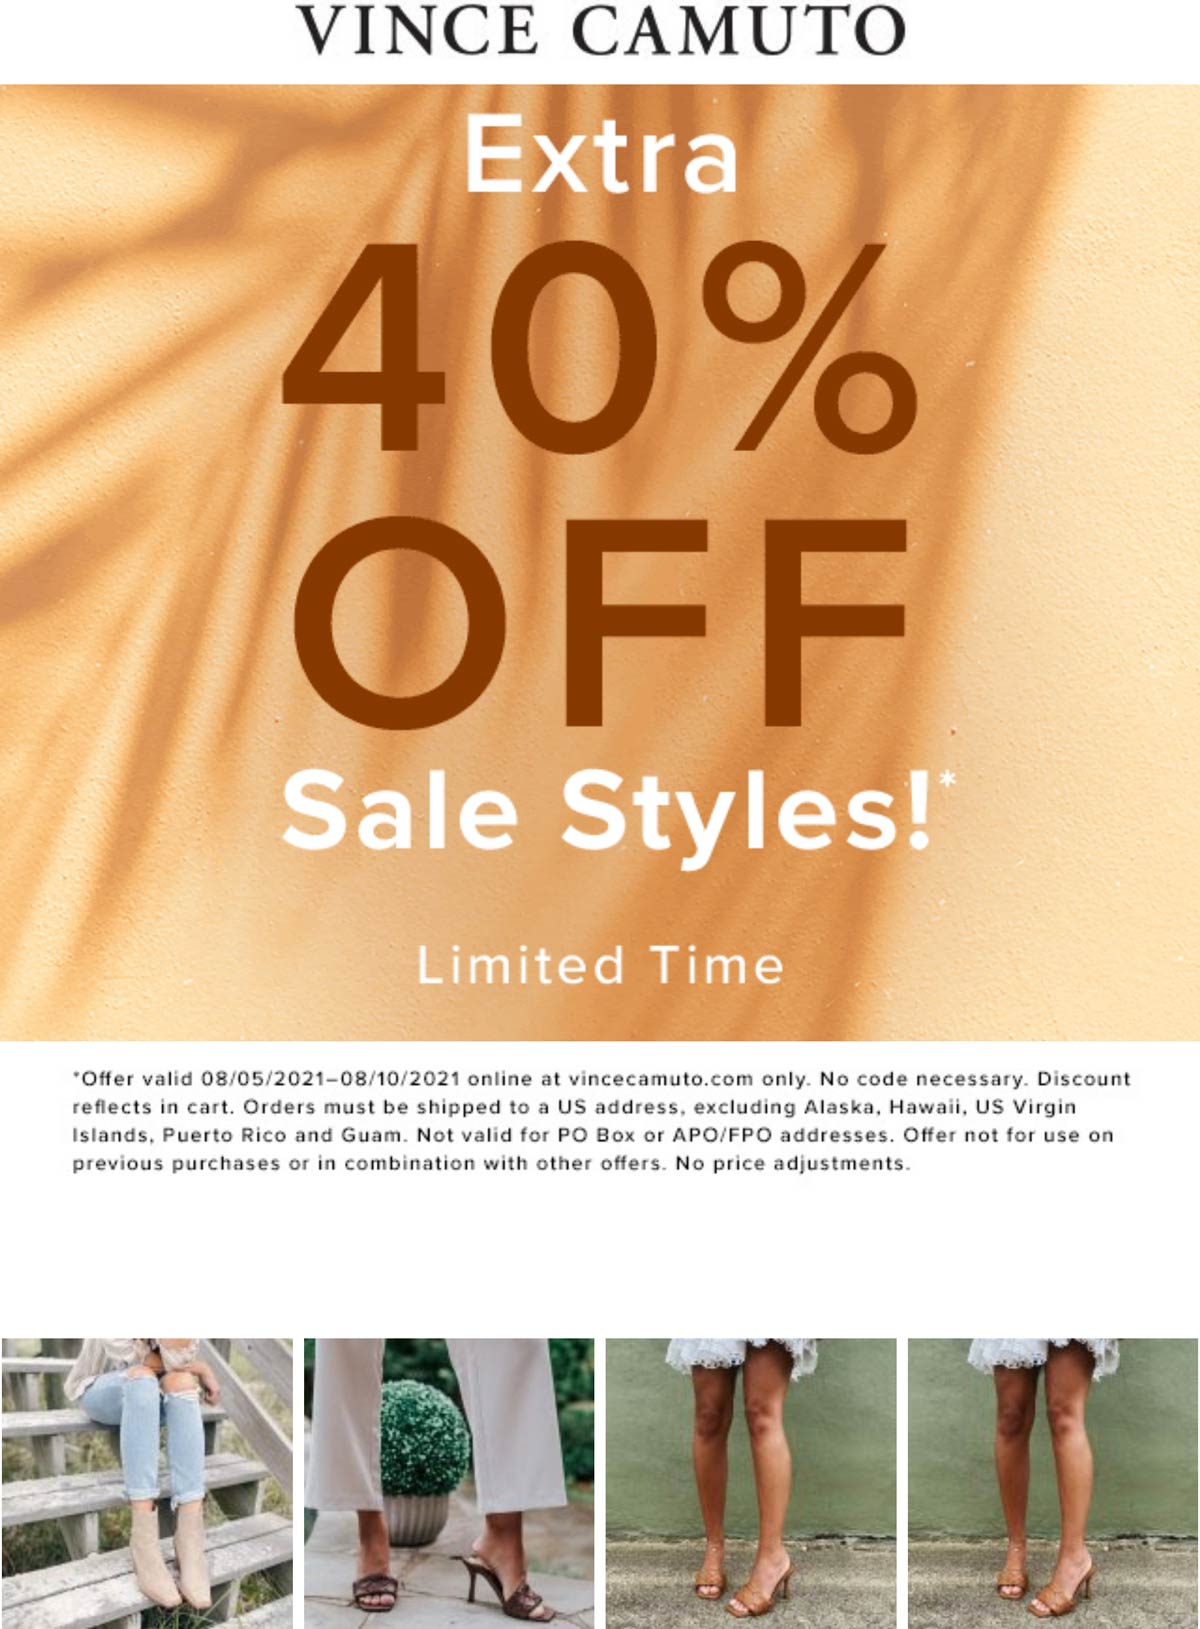 Vince Camuto stores Coupon  Extra 40% off sale styles online at Vince Camuto #vincecamuto 